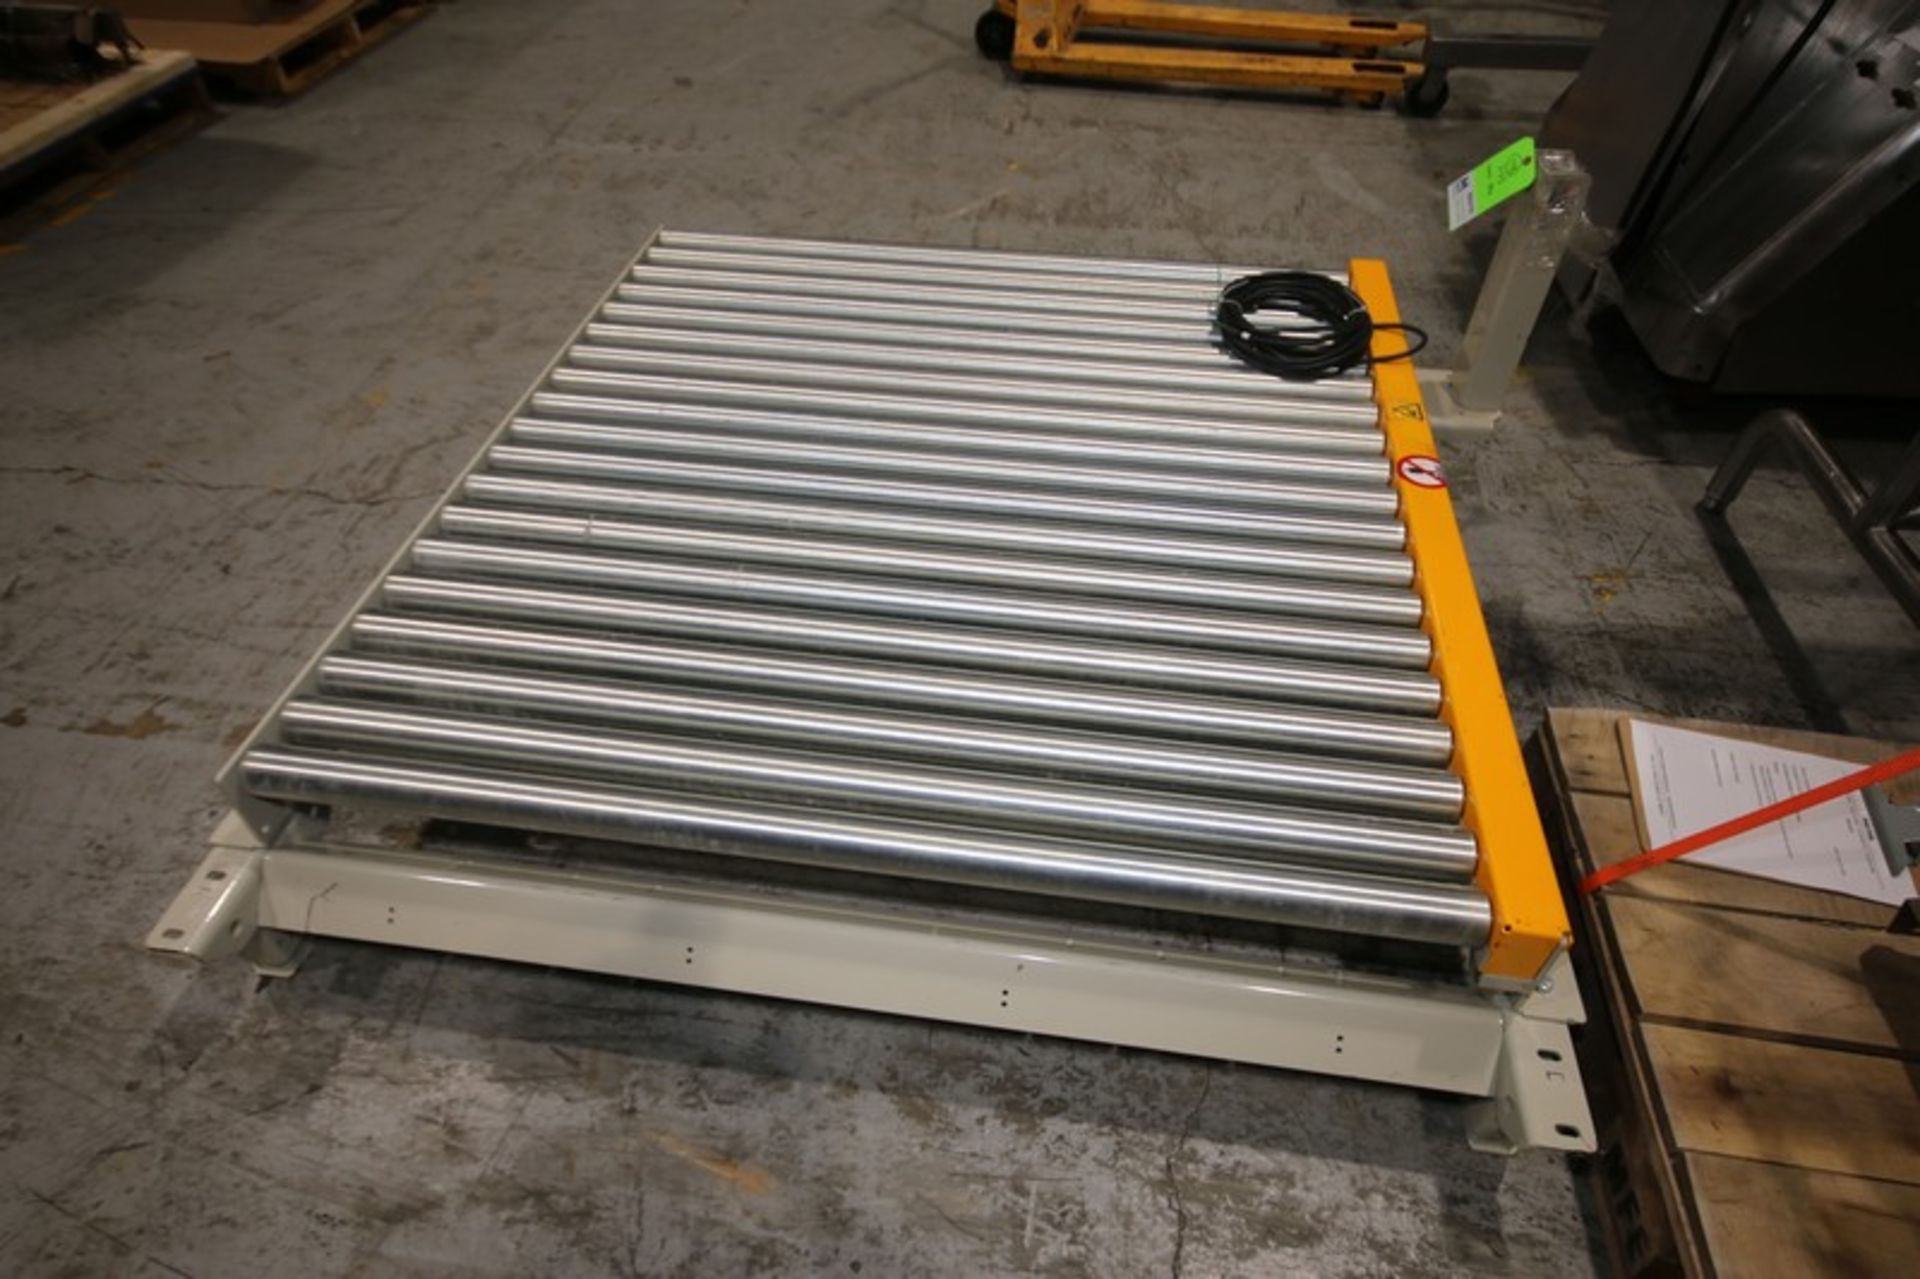 57" L x 52" W x 13" H Powered Conveyor Bed with SEW Drive Motor, (Like New Condition) (INV#96679) ( - Image 4 of 4